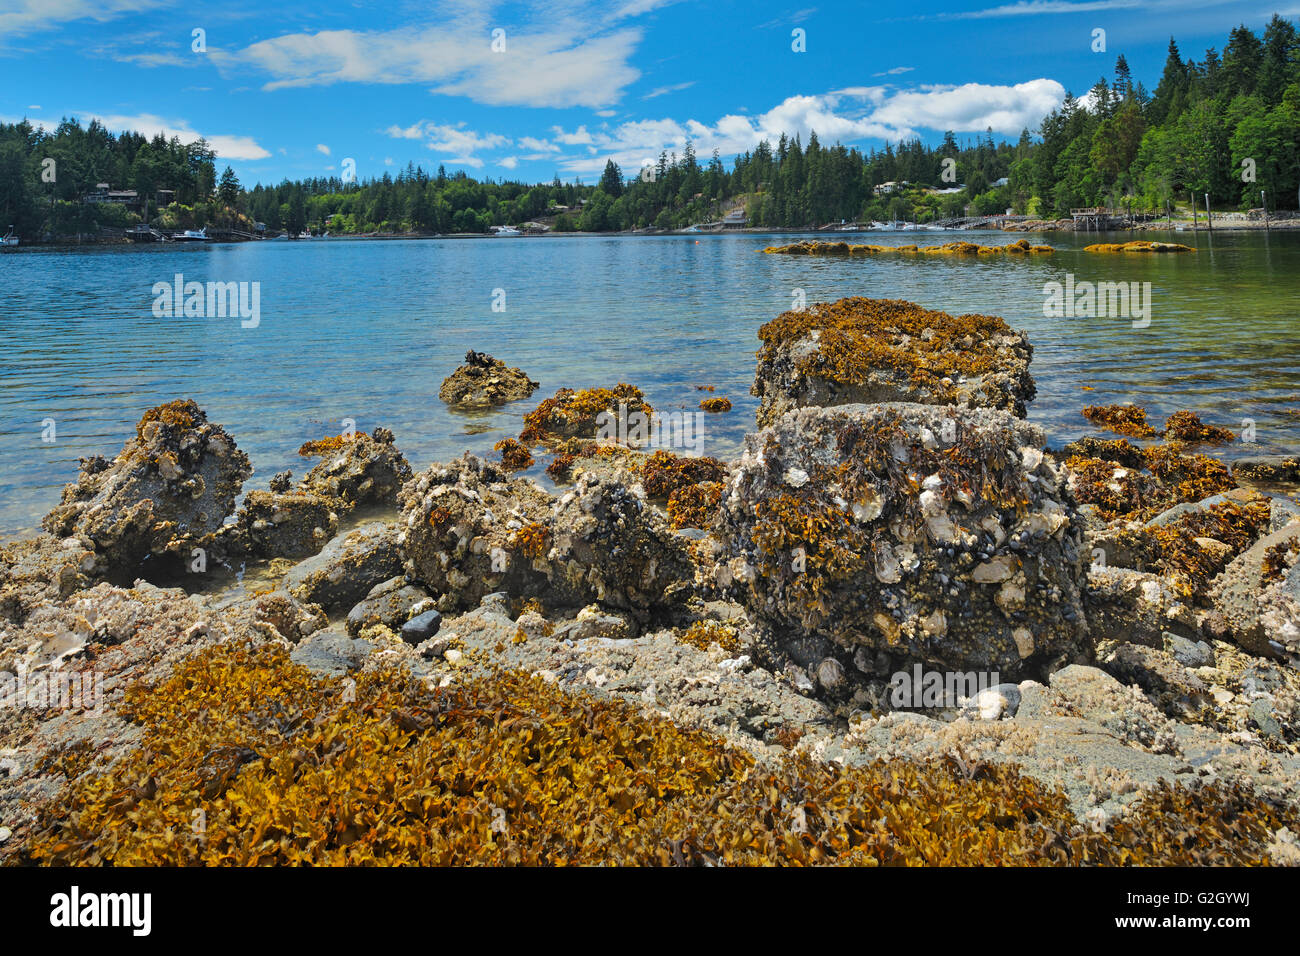 Oyster bed along the Sunshine Coast  Pender Harbour British Columbia Canada Stock Photo